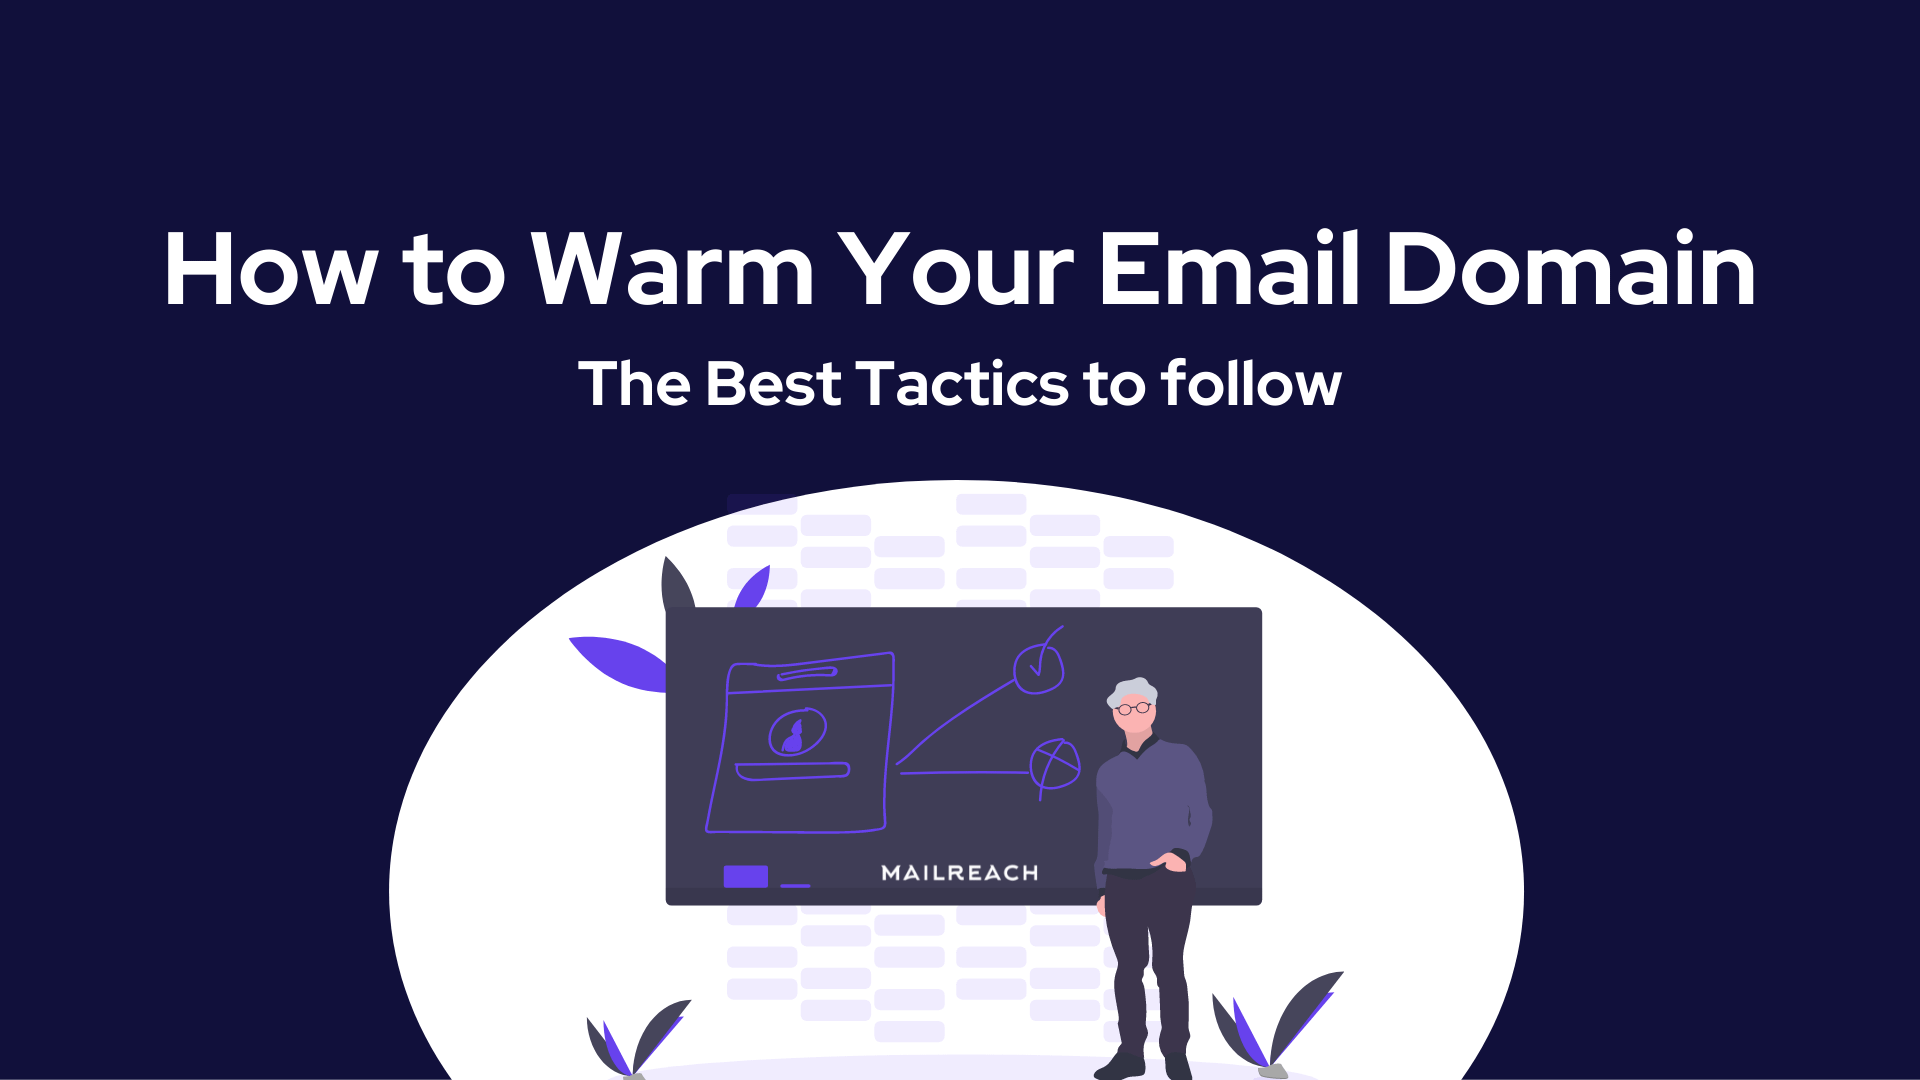 warm up email domain - best tactics by Mailreach